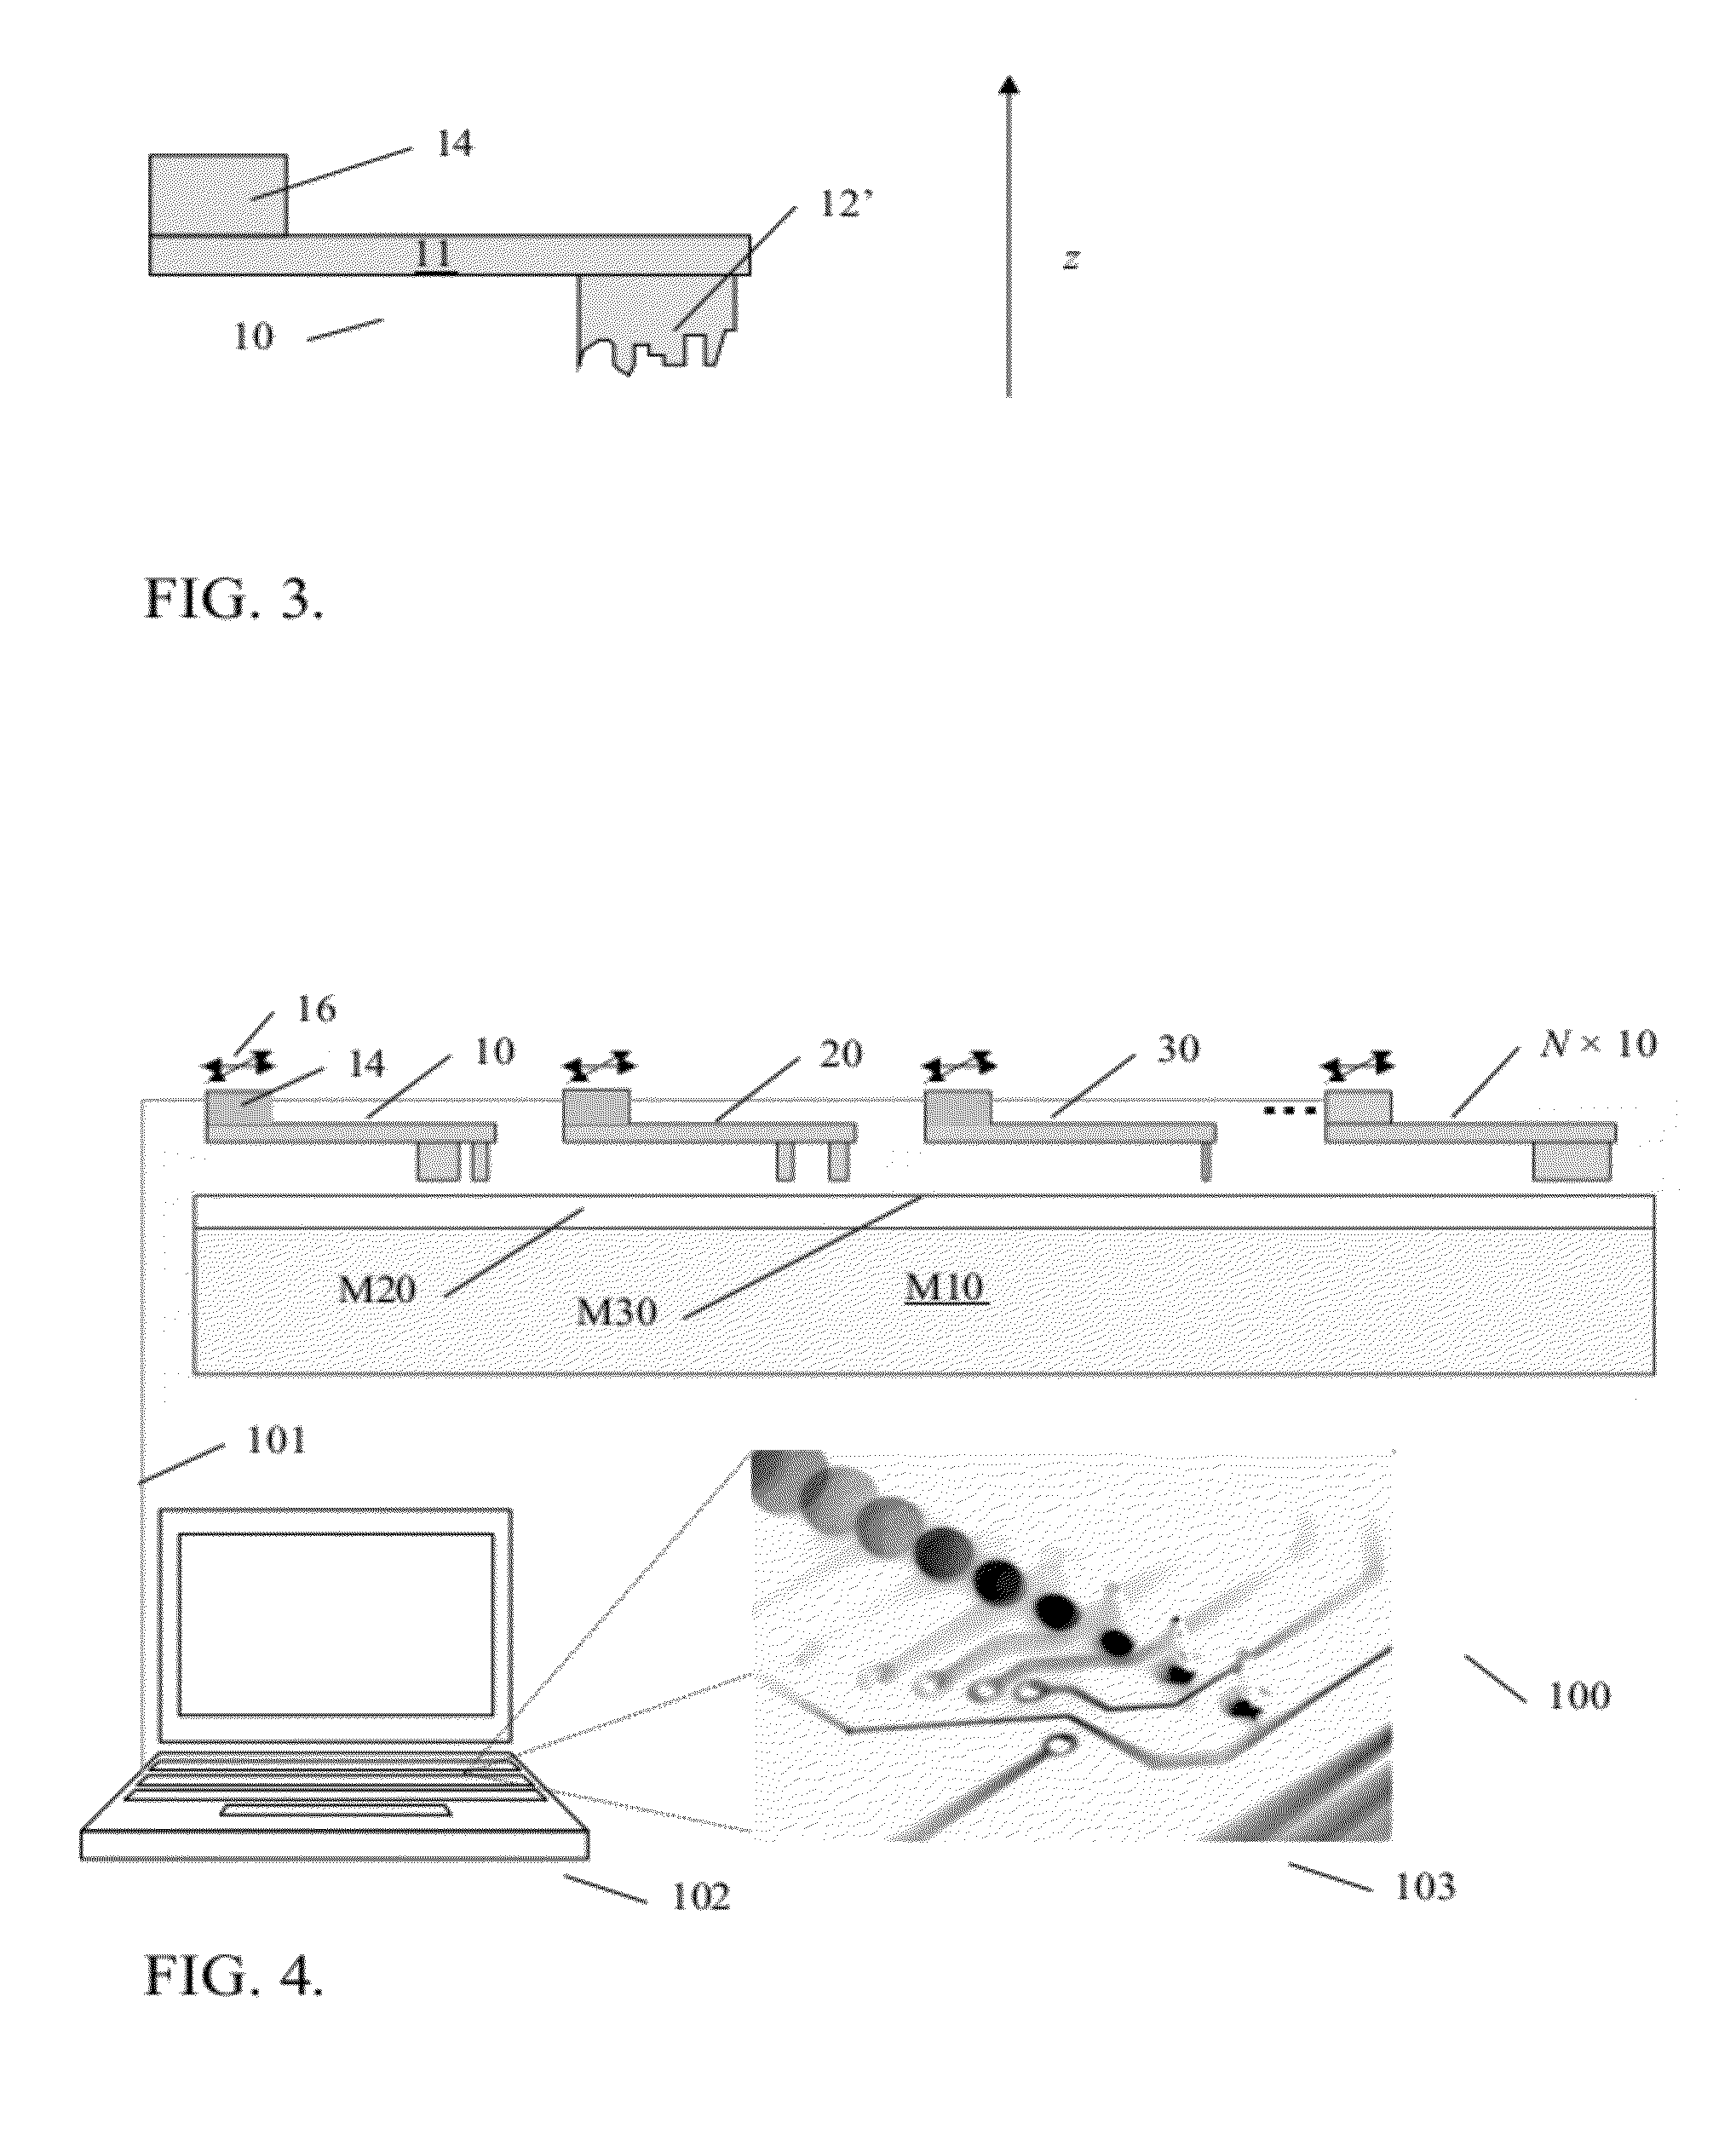 Scanning probe lithography apparatus and method, and material accordingly obtained